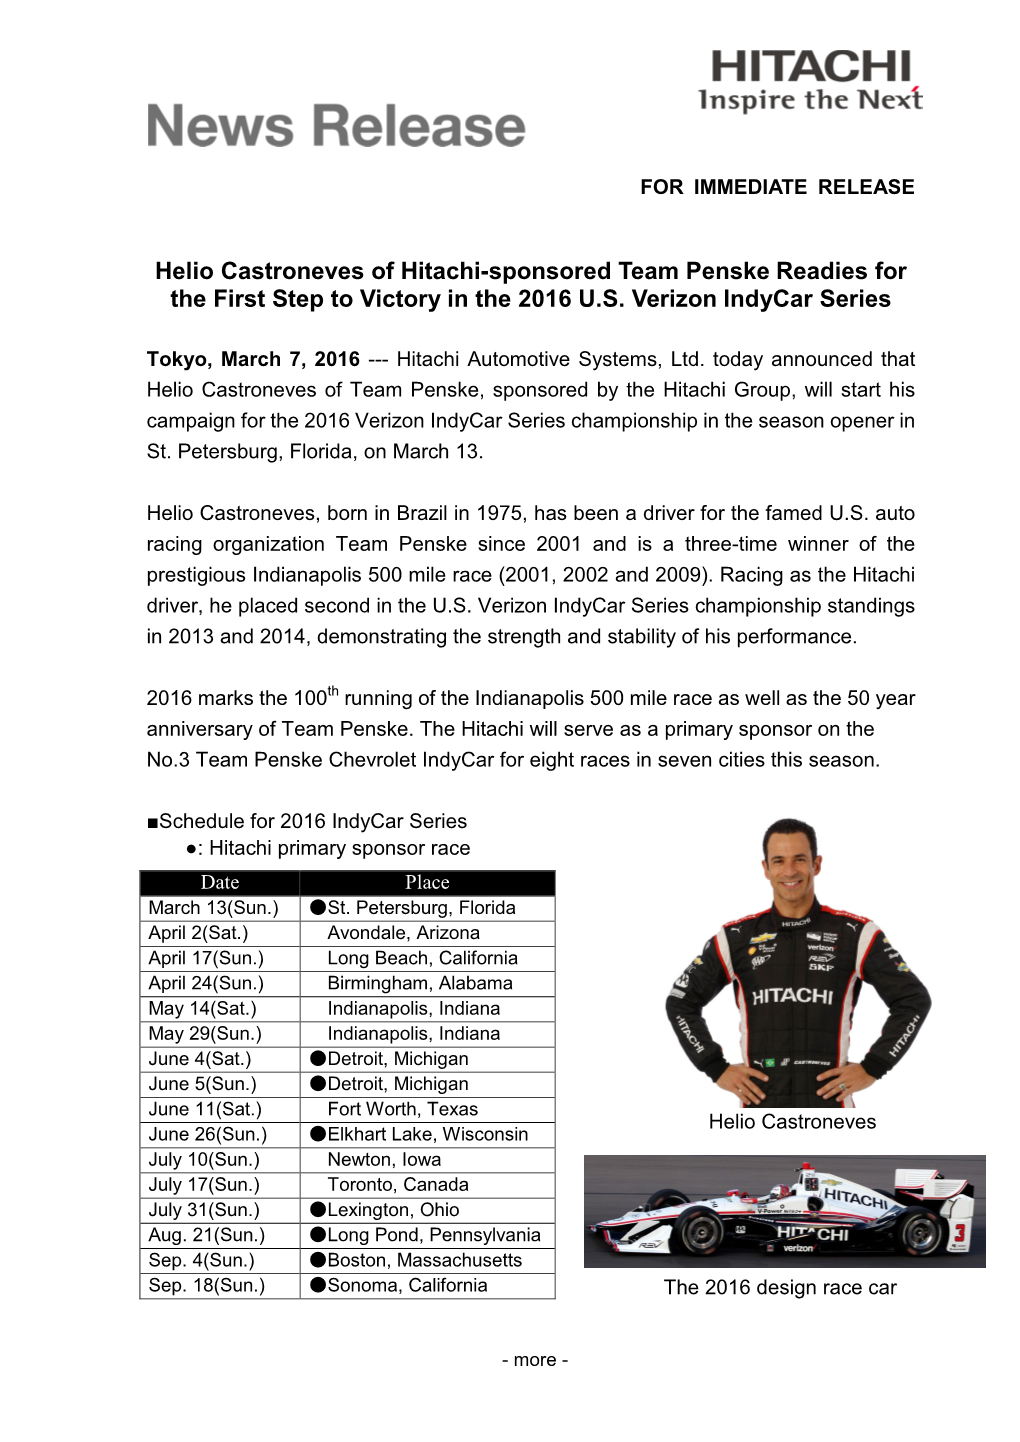 Helio Castroneves of Hitachi-Sponsored Team Penske Readies for the First Step to Victory in the 2016 U.S